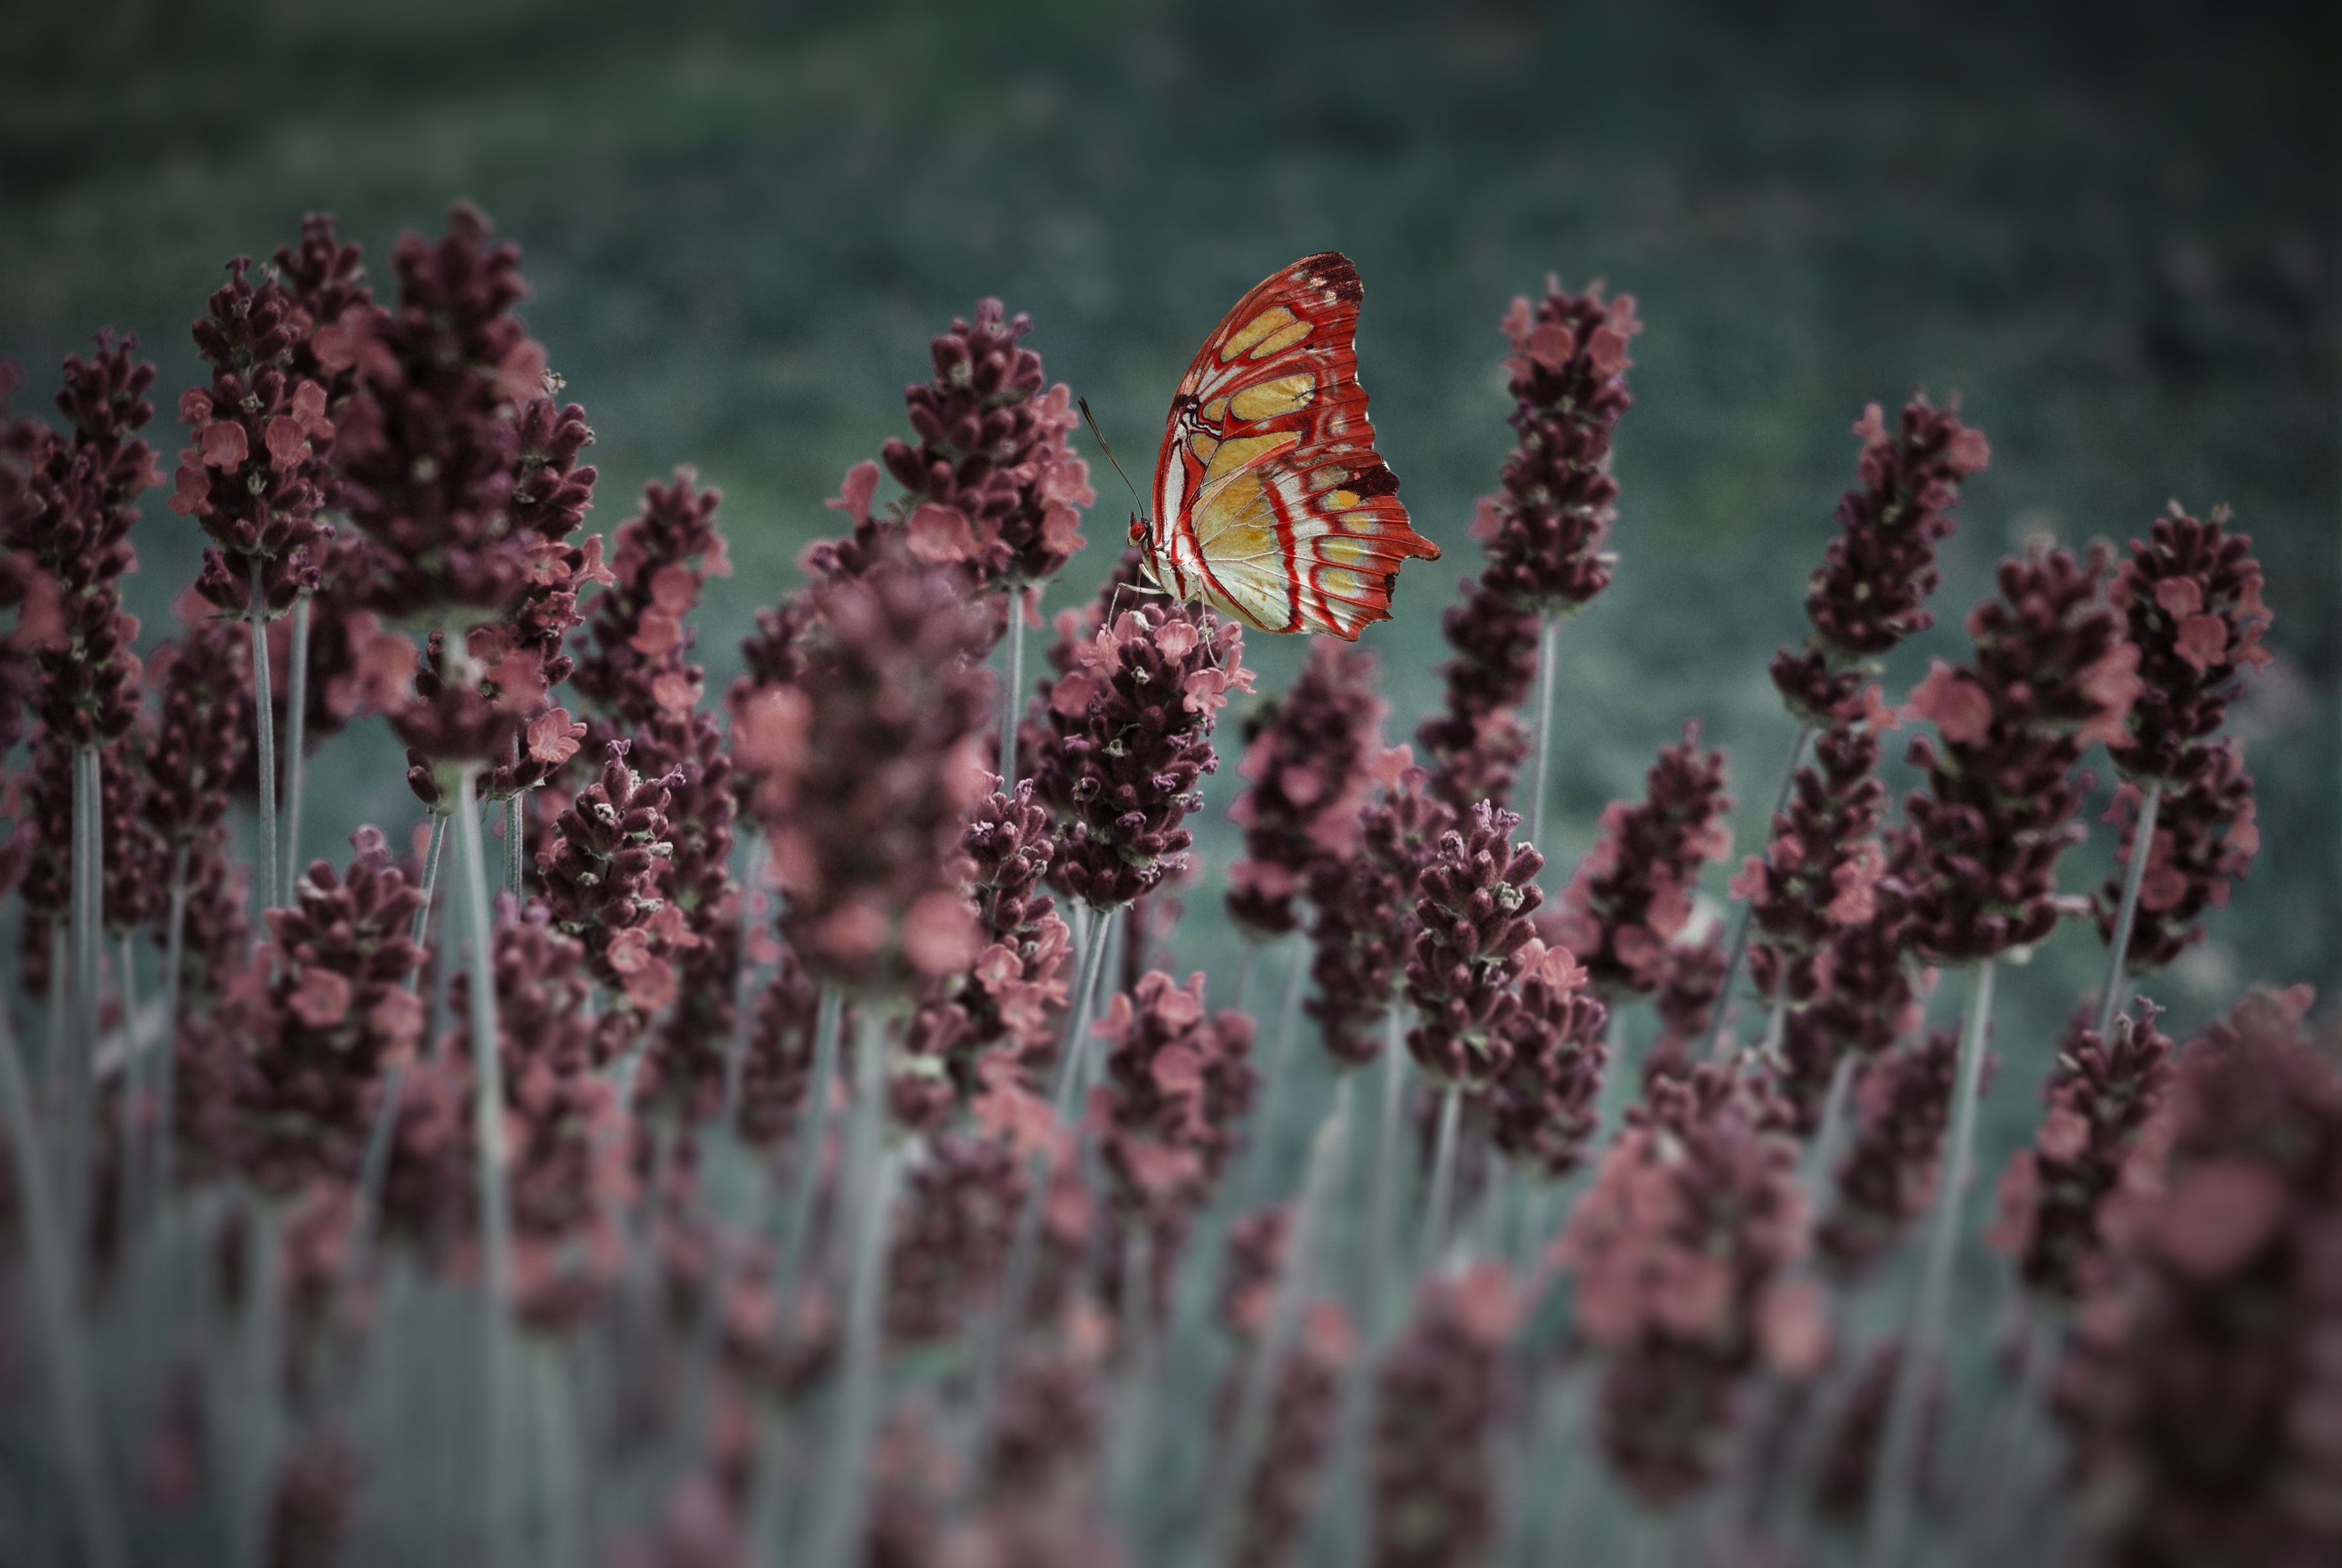 Red and yellow butterfly photo